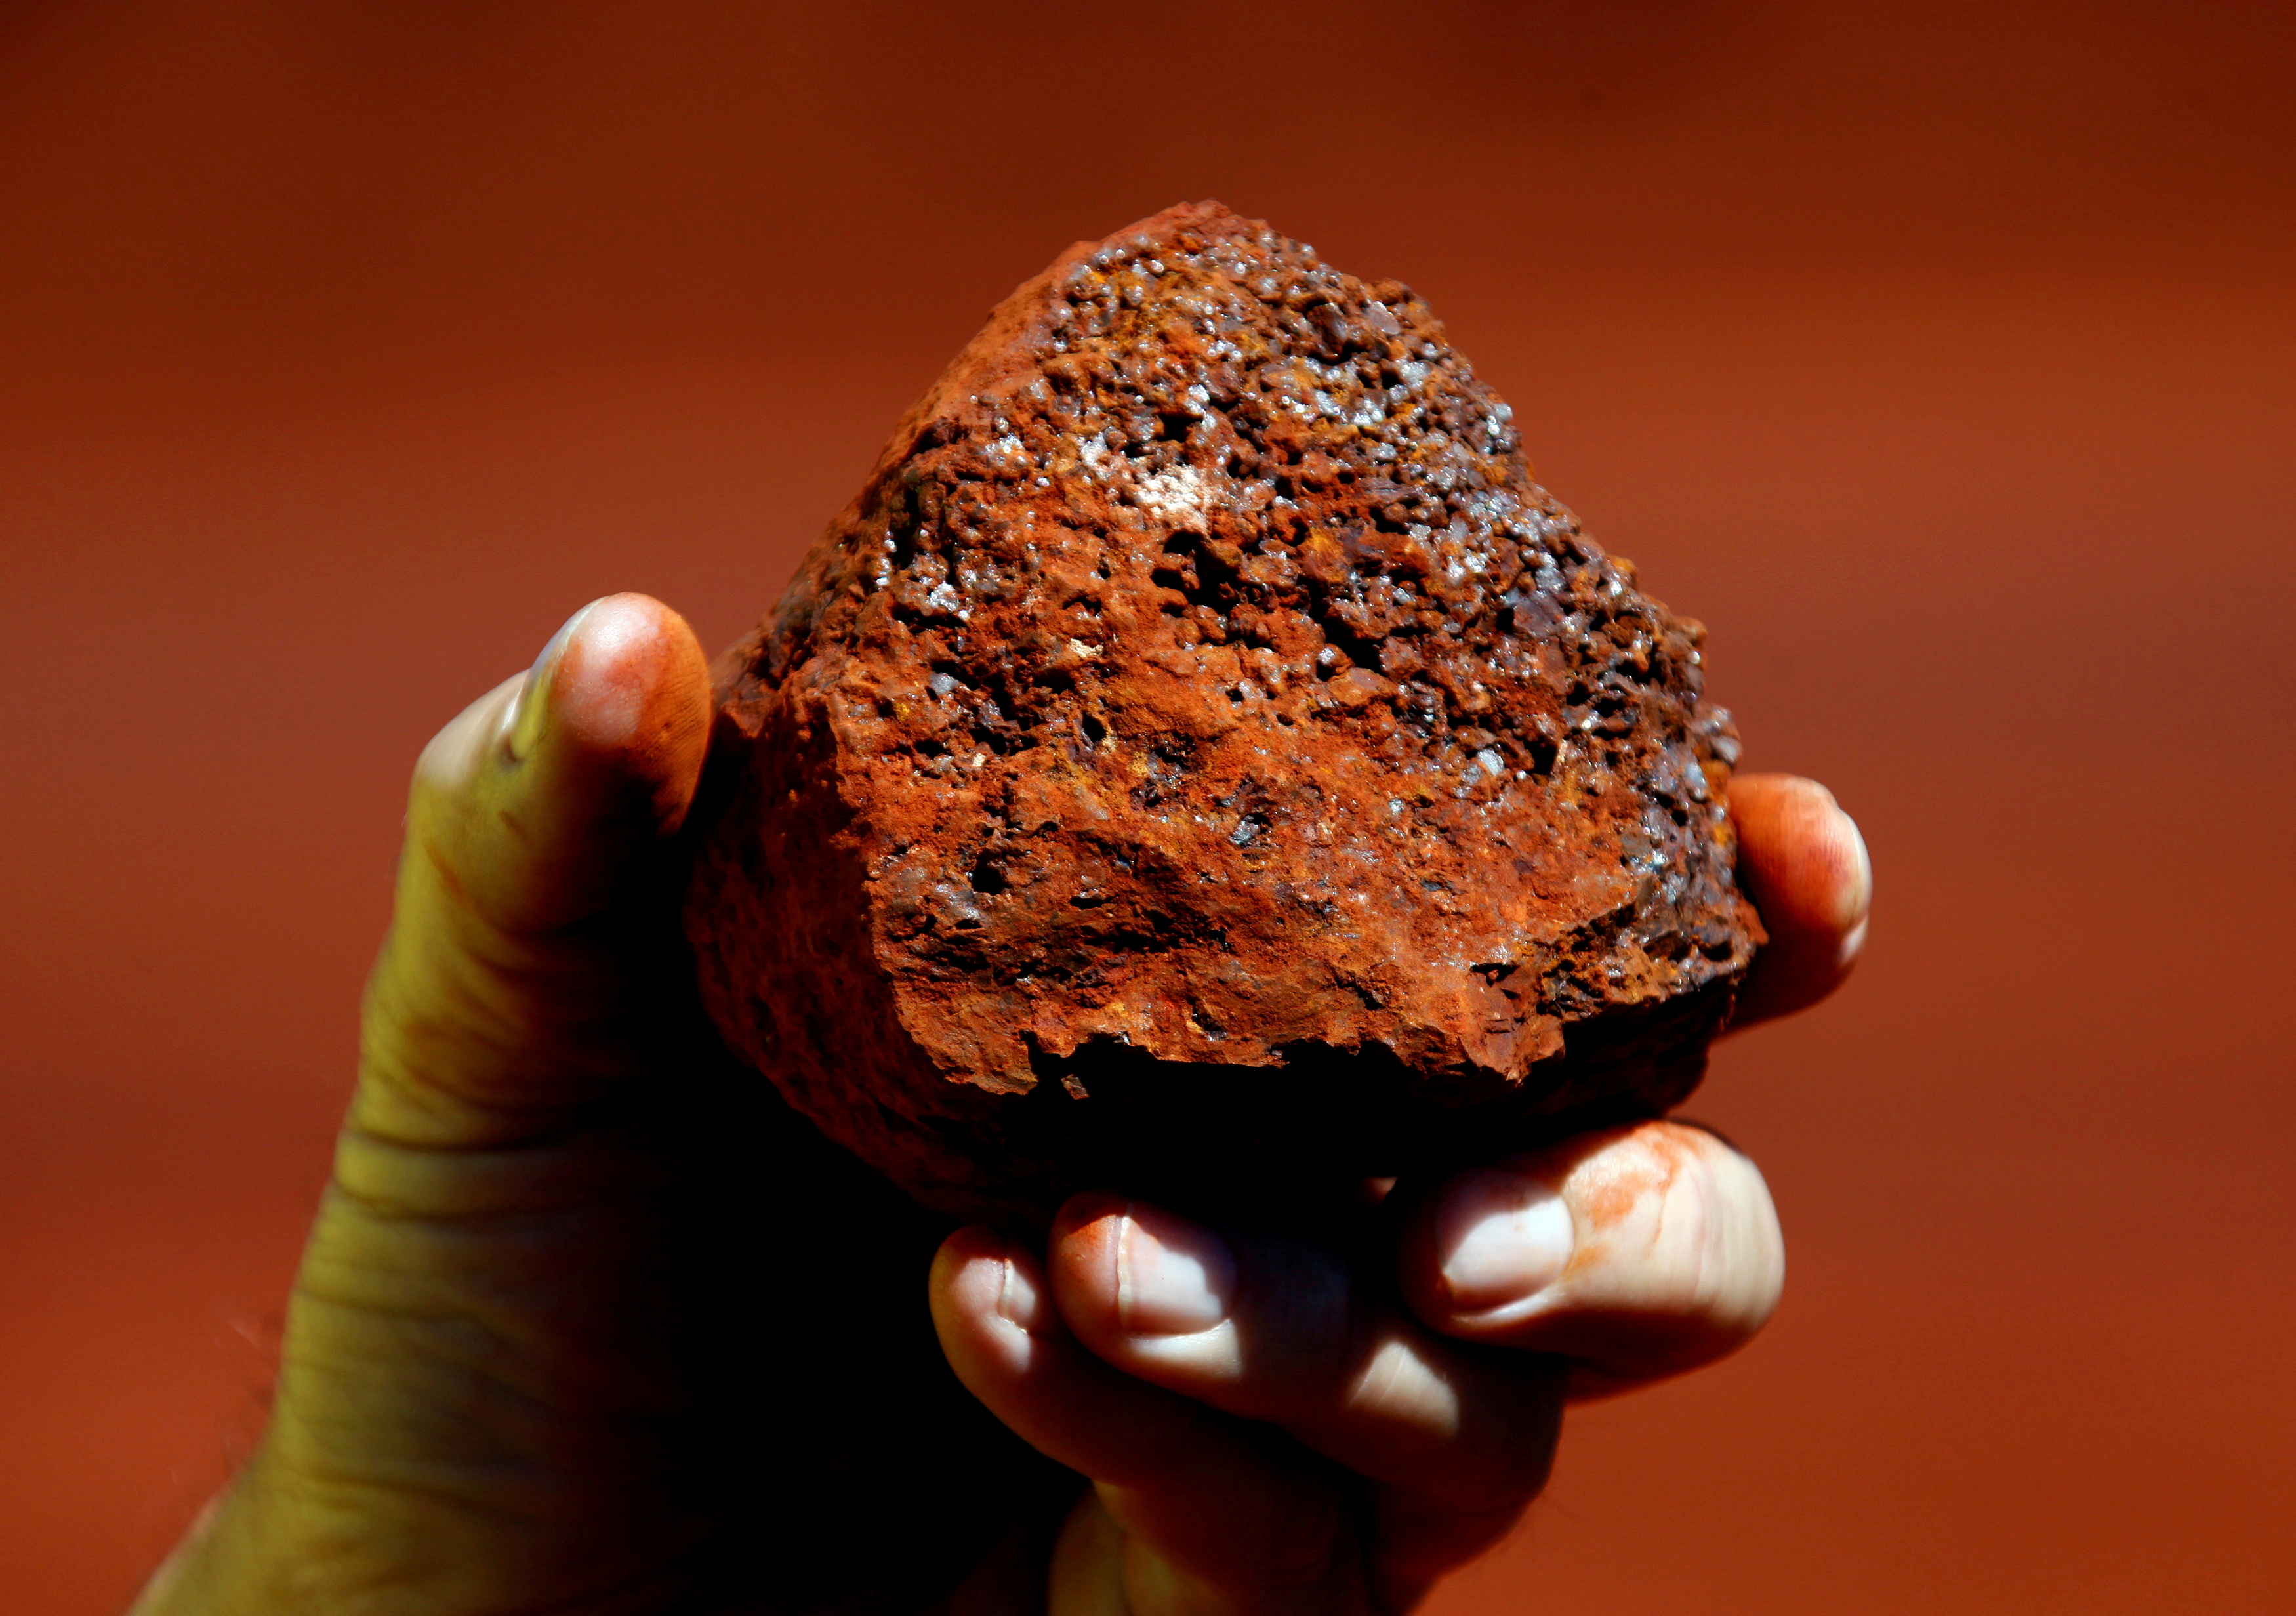 A miner holds a lump of iron ore at a mine located in the Pilbara region of Western Australia December 2, 2013. REUTERS/David Gray/File Photo